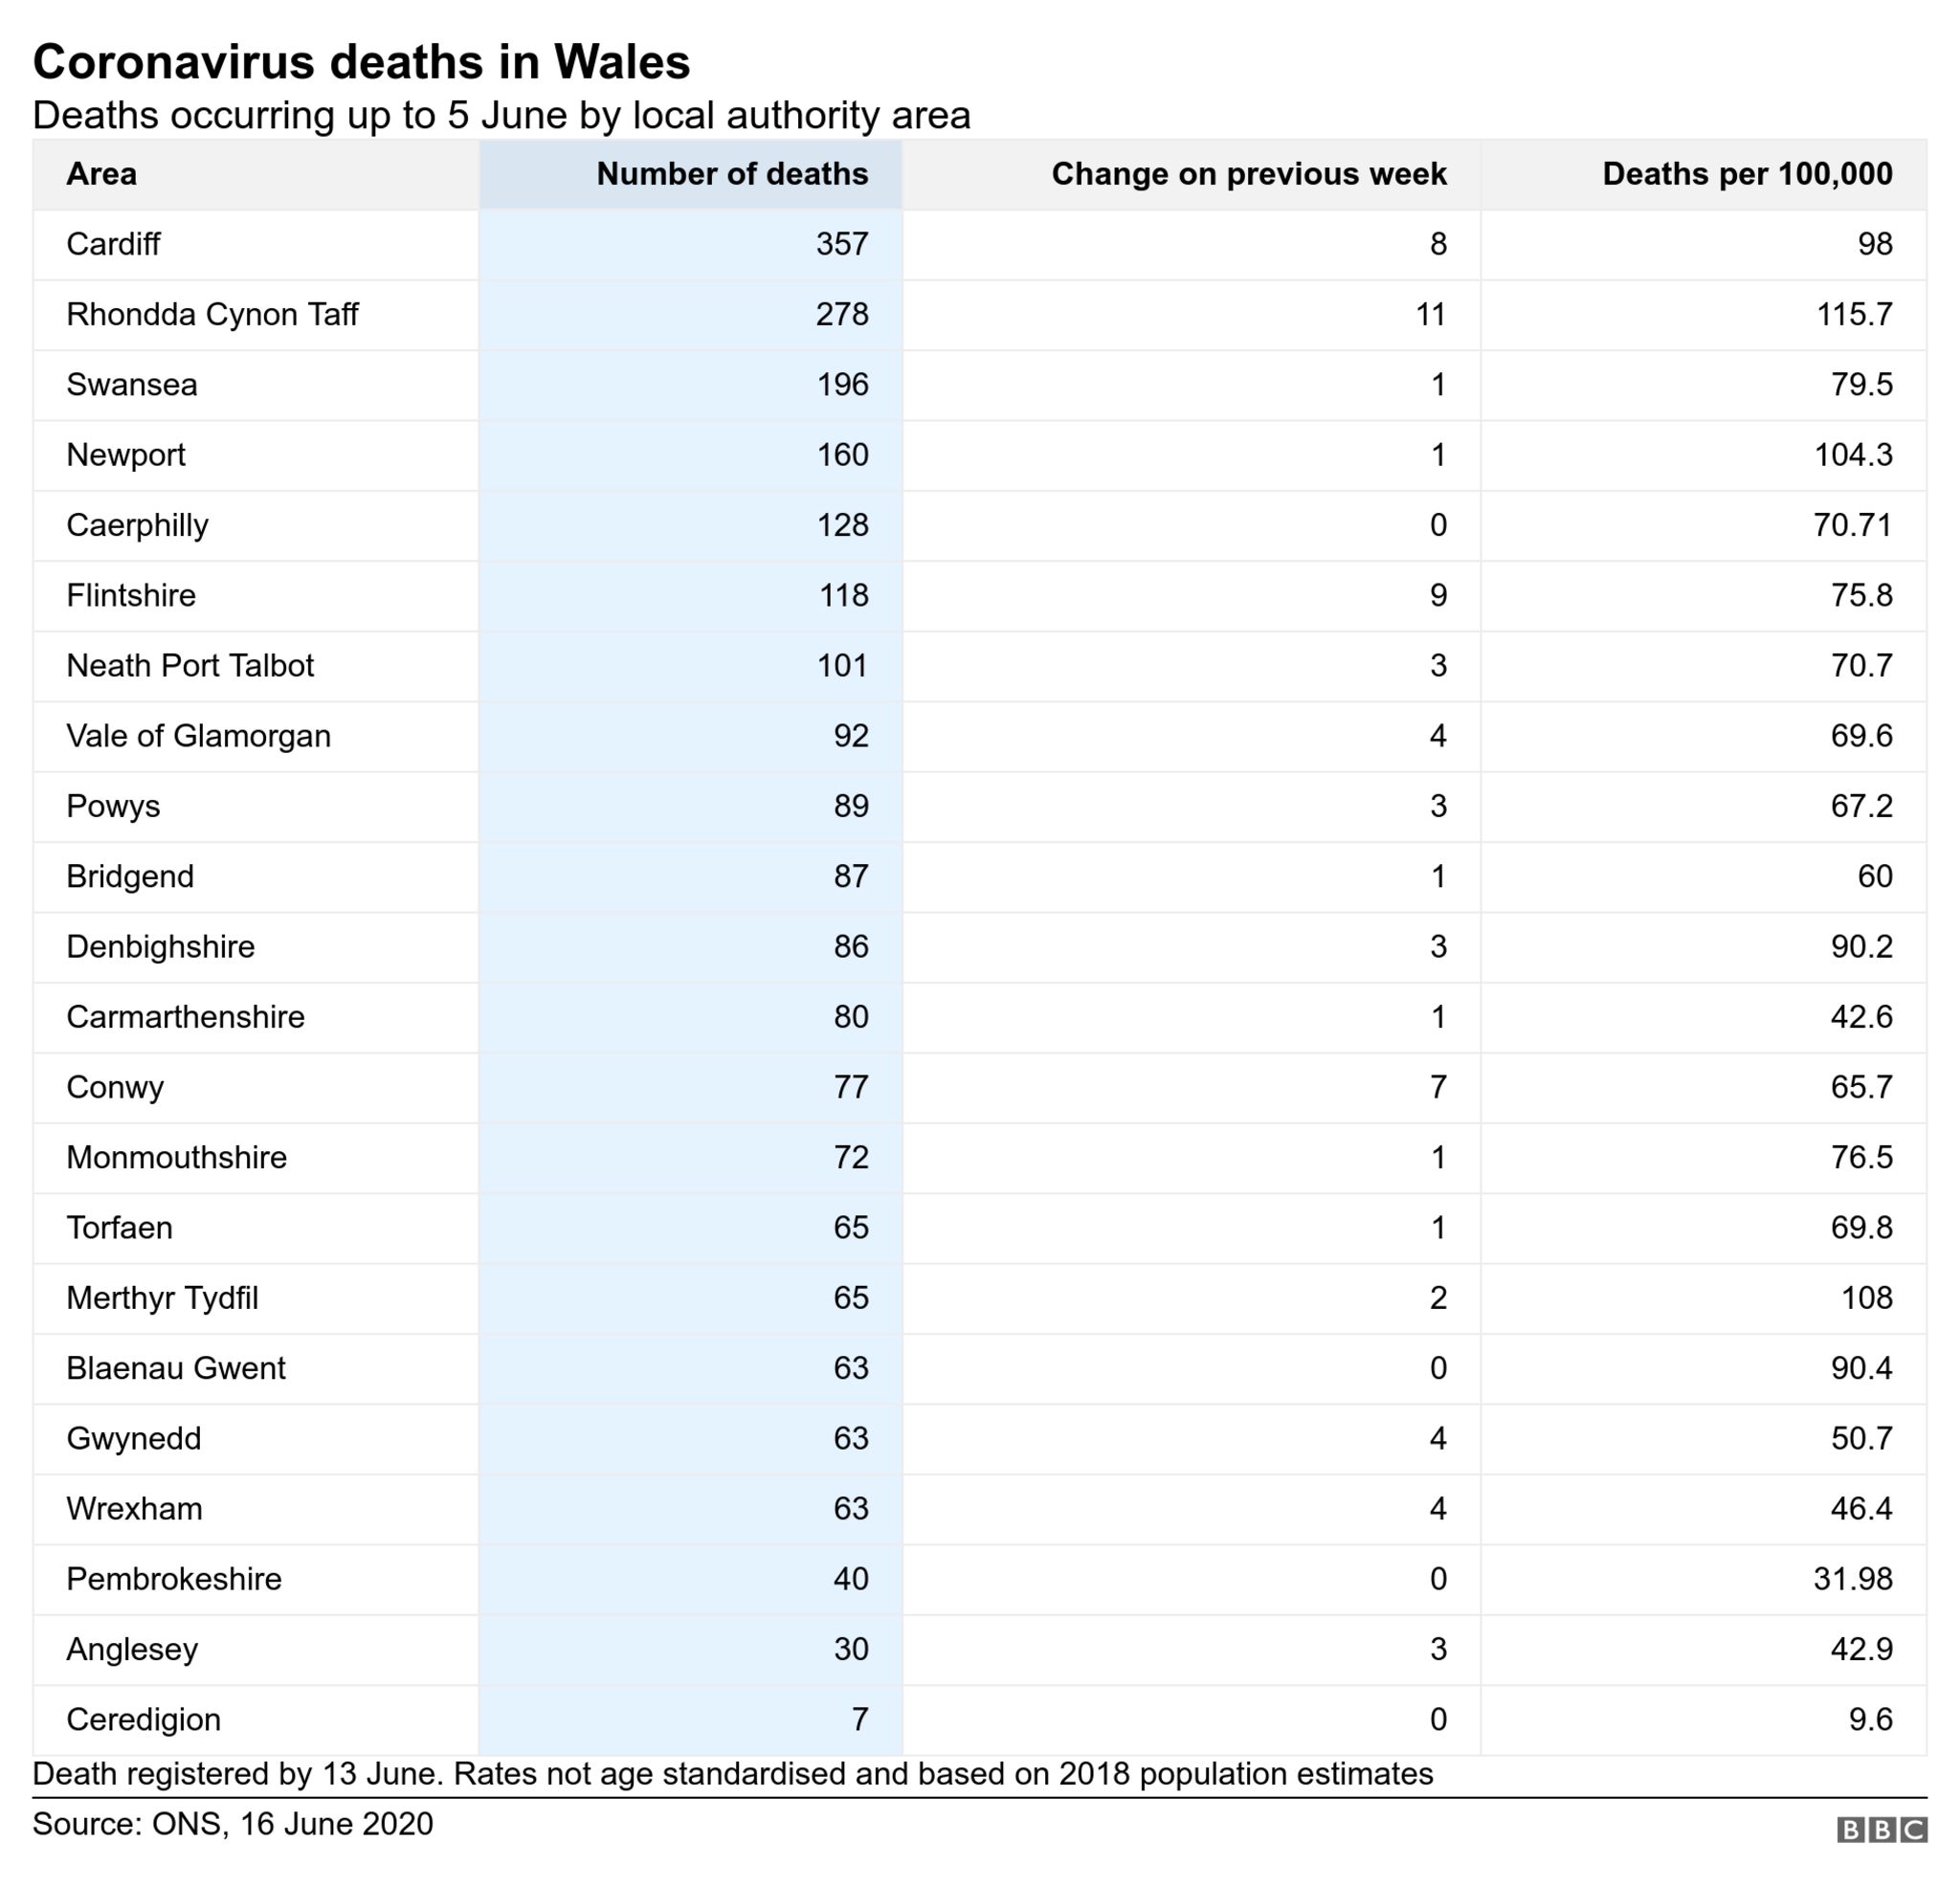 This table gives a breakdown of registered Covid-19 deaths so far by council area